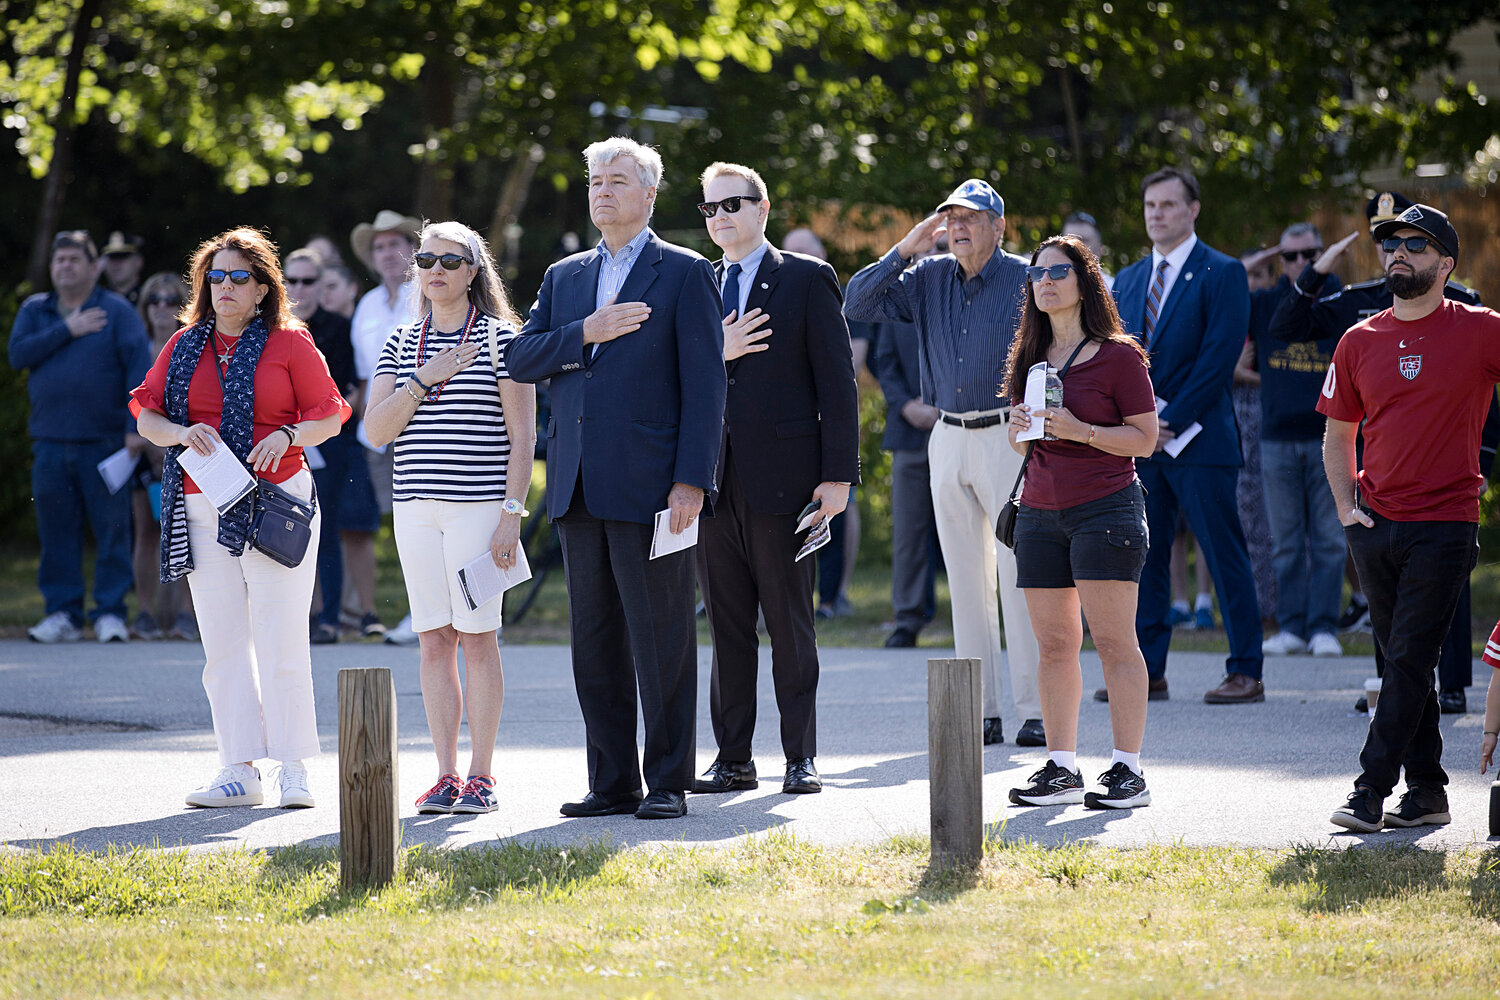 A large crowd gathers at Victory Gate for a wreath laying ceremony during Barrington's Memorial Day services, Monday.